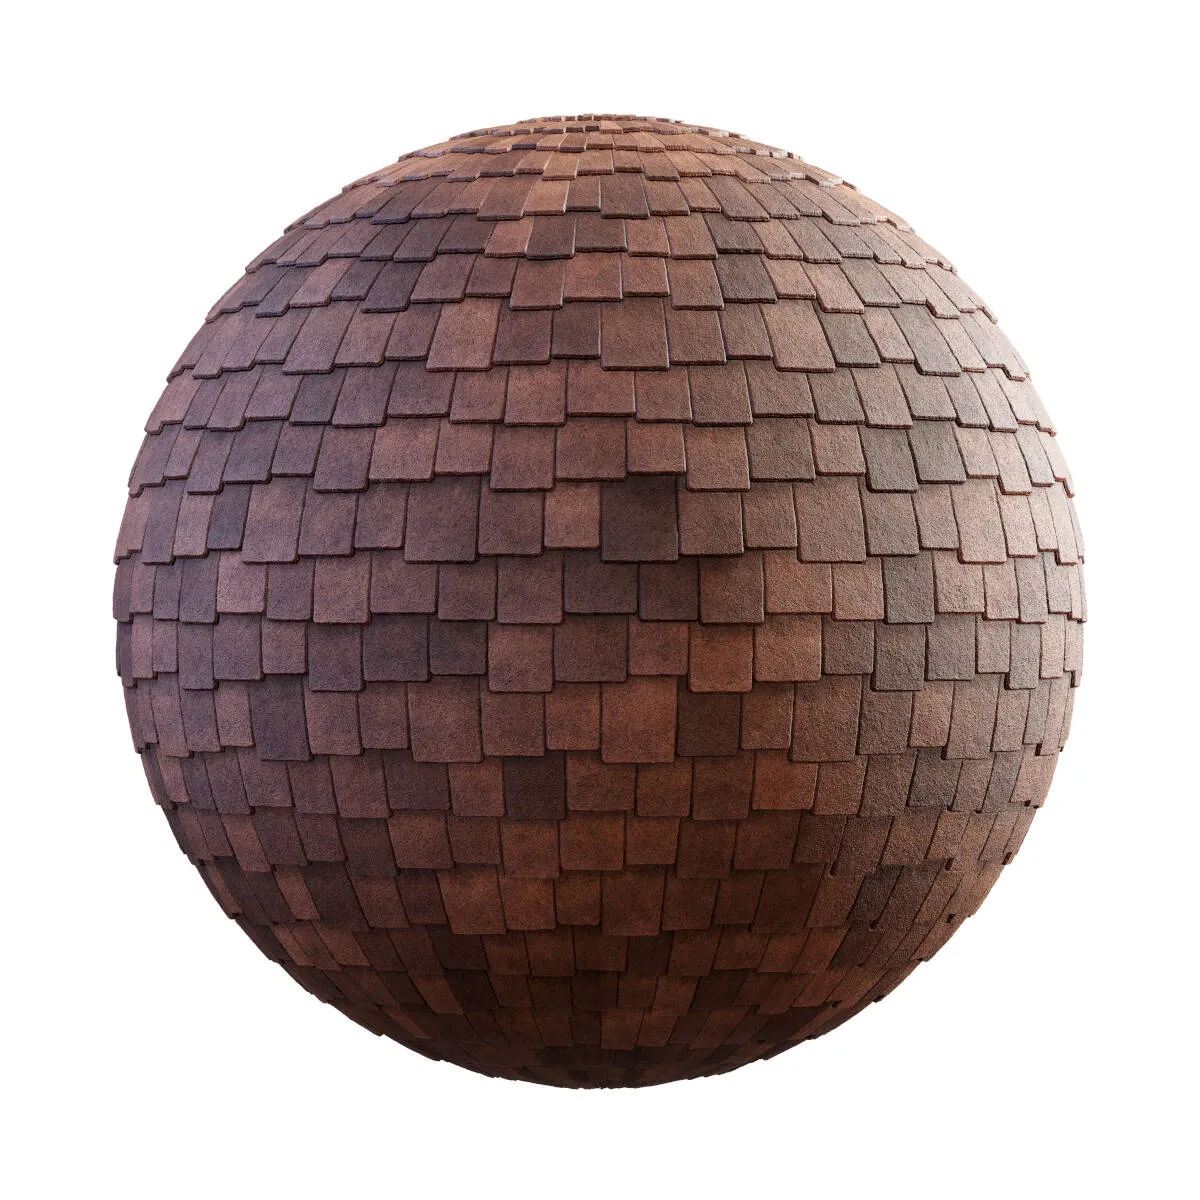 PBR Textures Volume 35 – Roofs – 4K – brown_shingle_roof_35_72